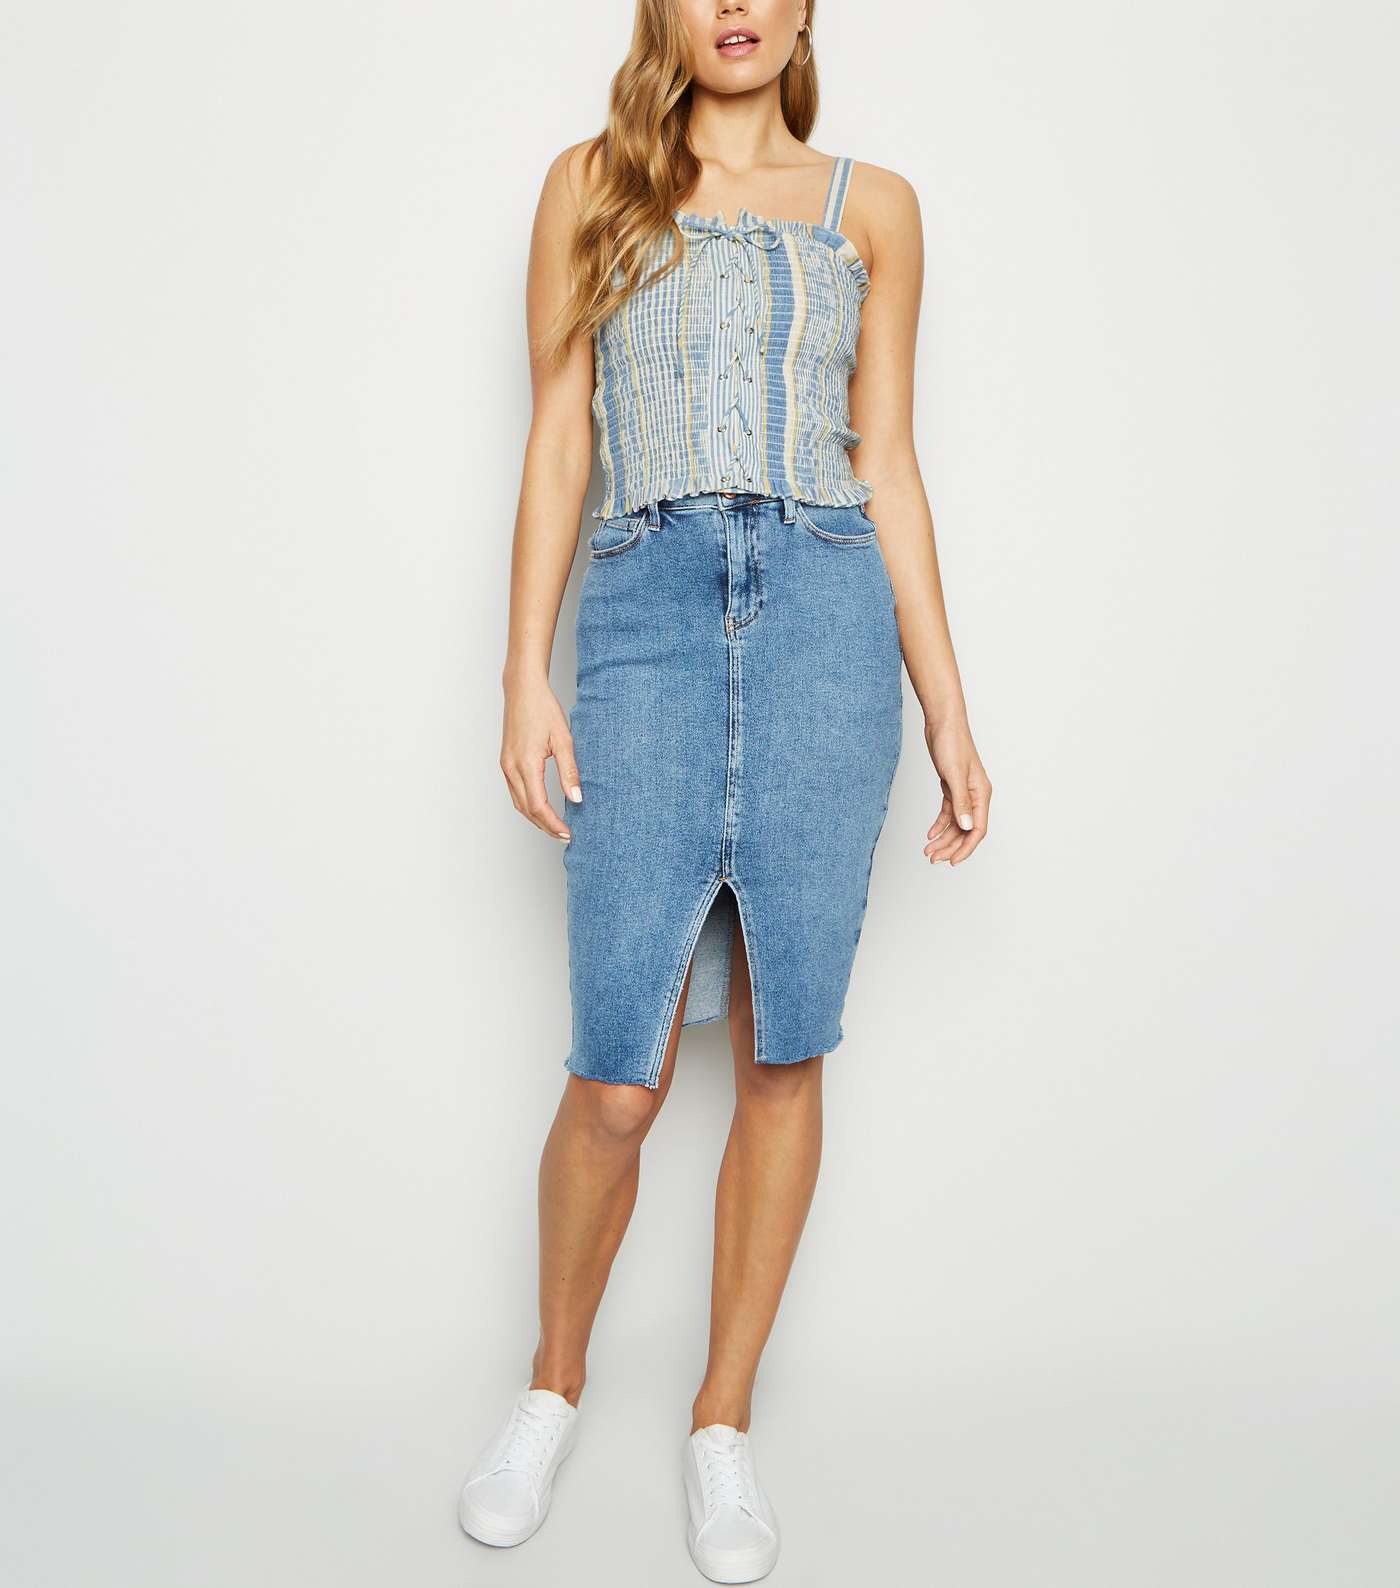 Blue Stripe Shirred Lace Up Top Image 2